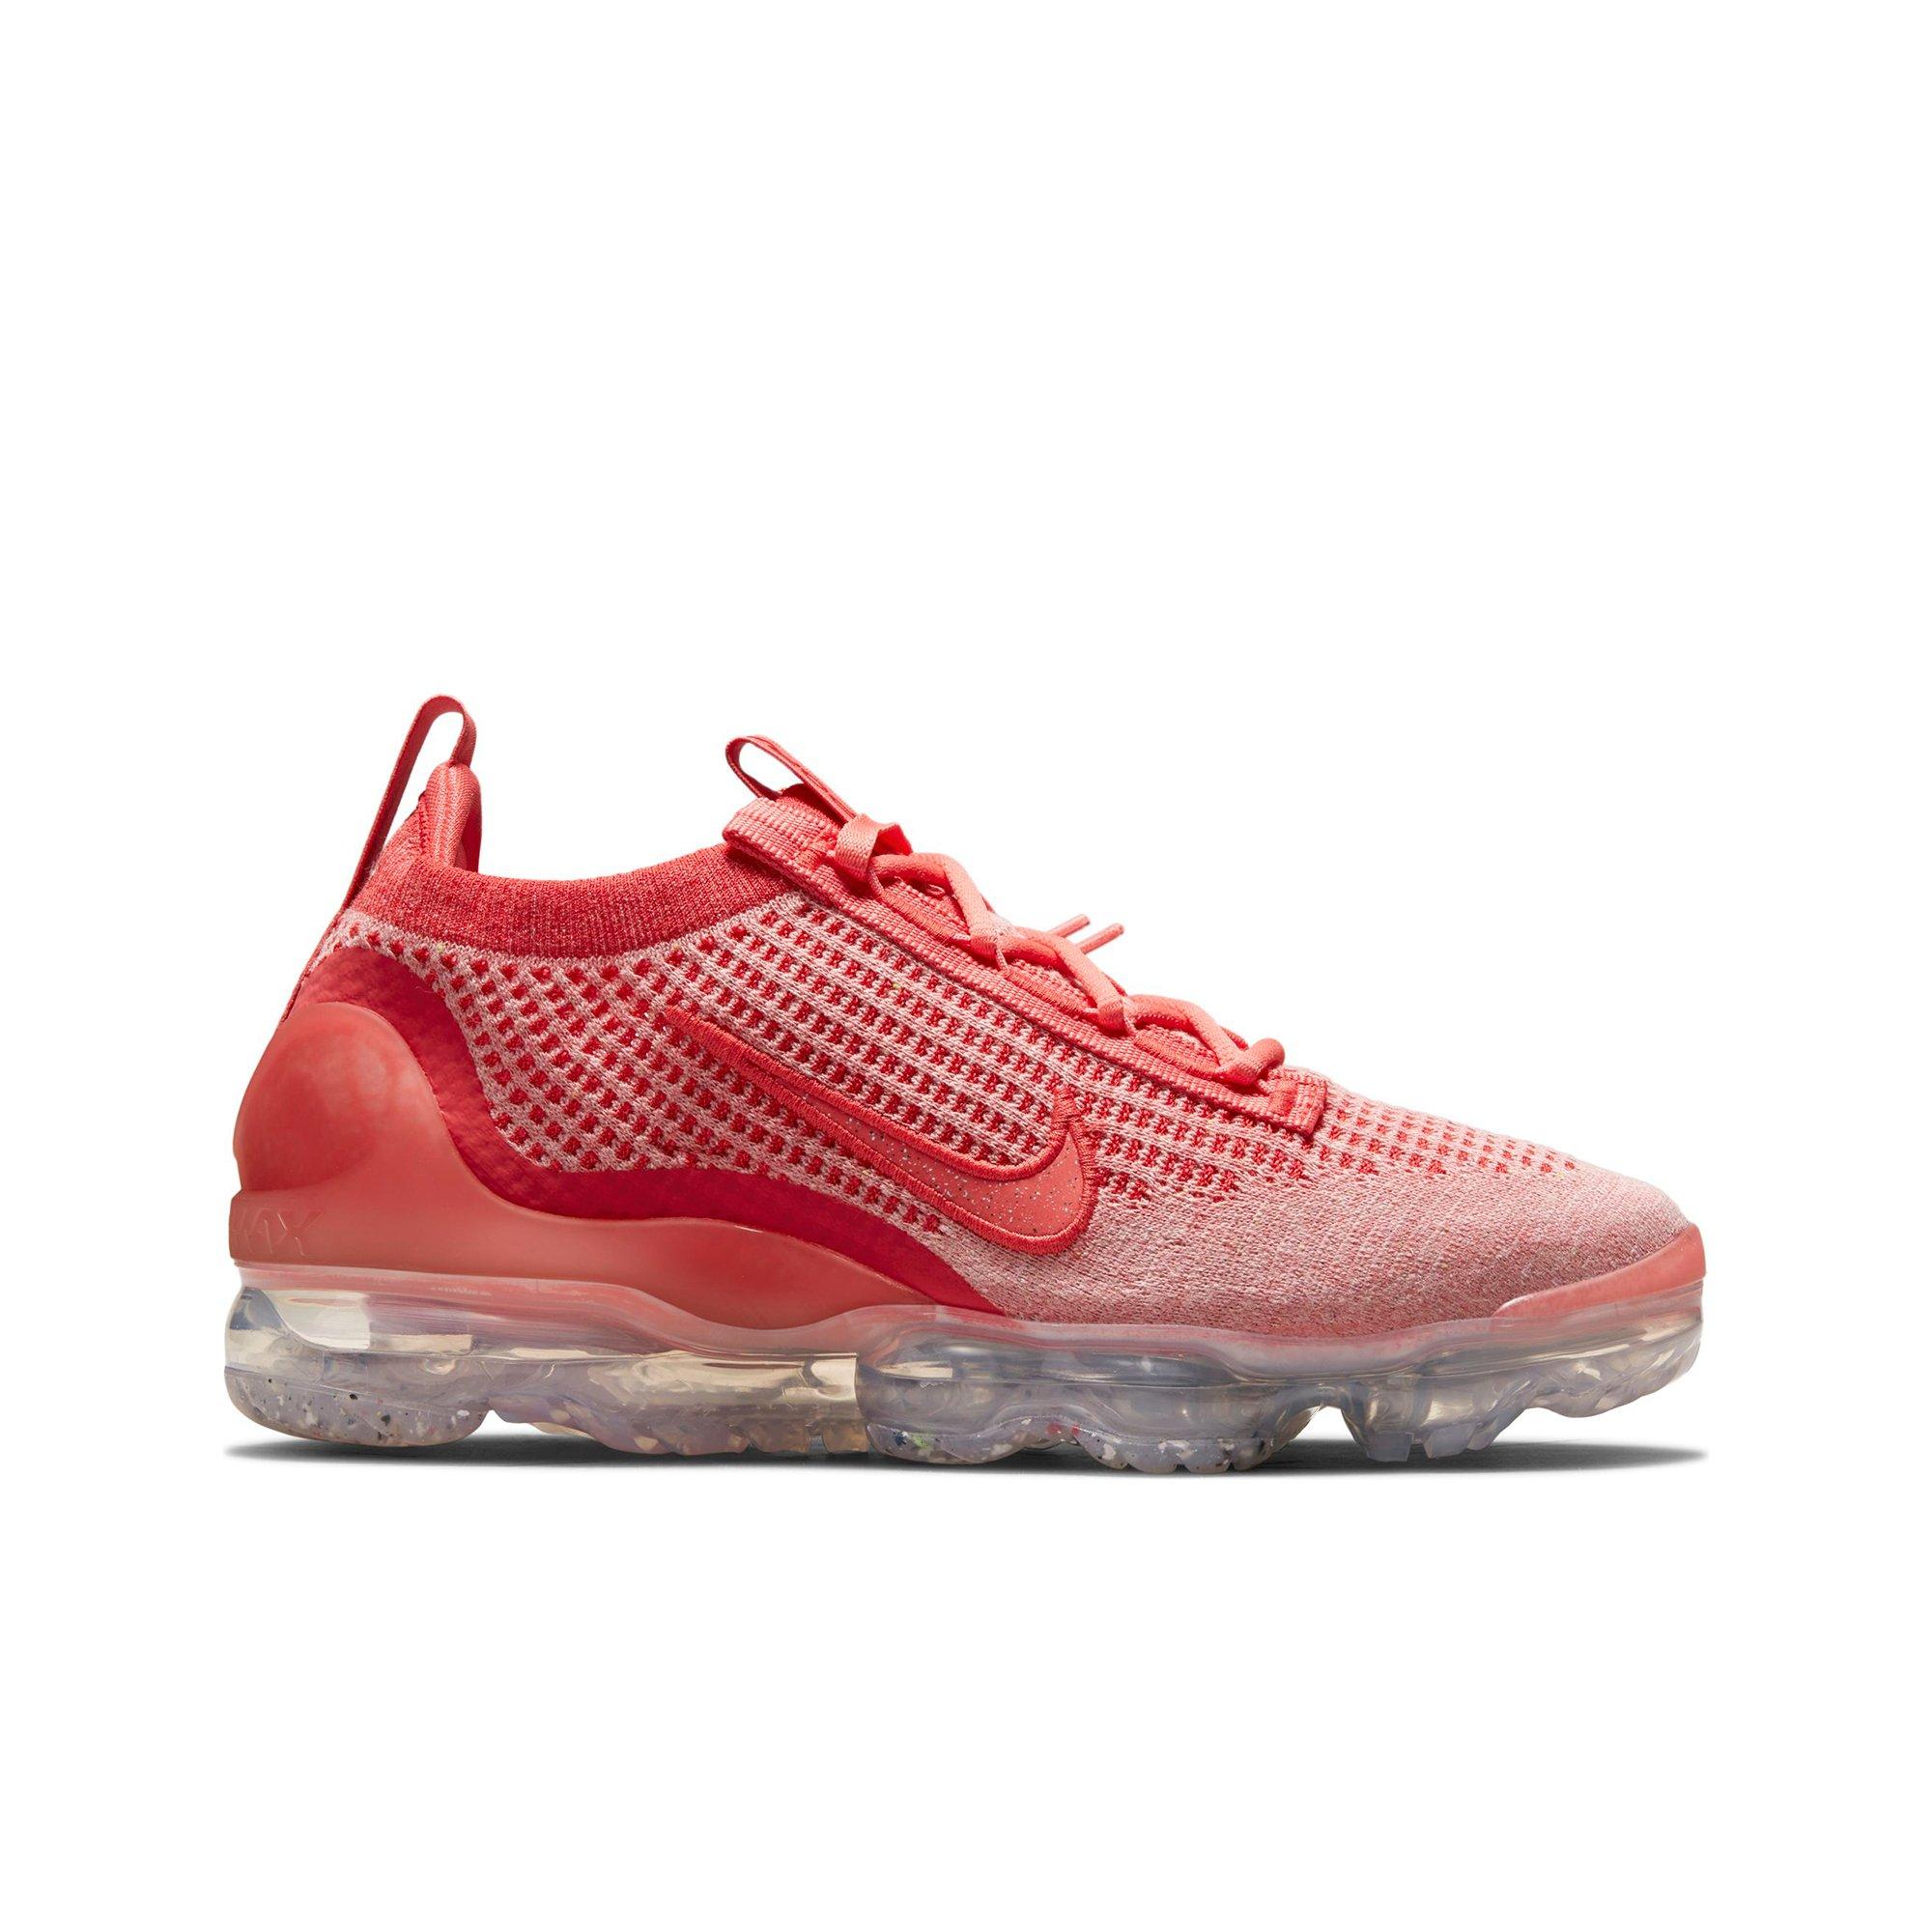 red vapormax size 6.5